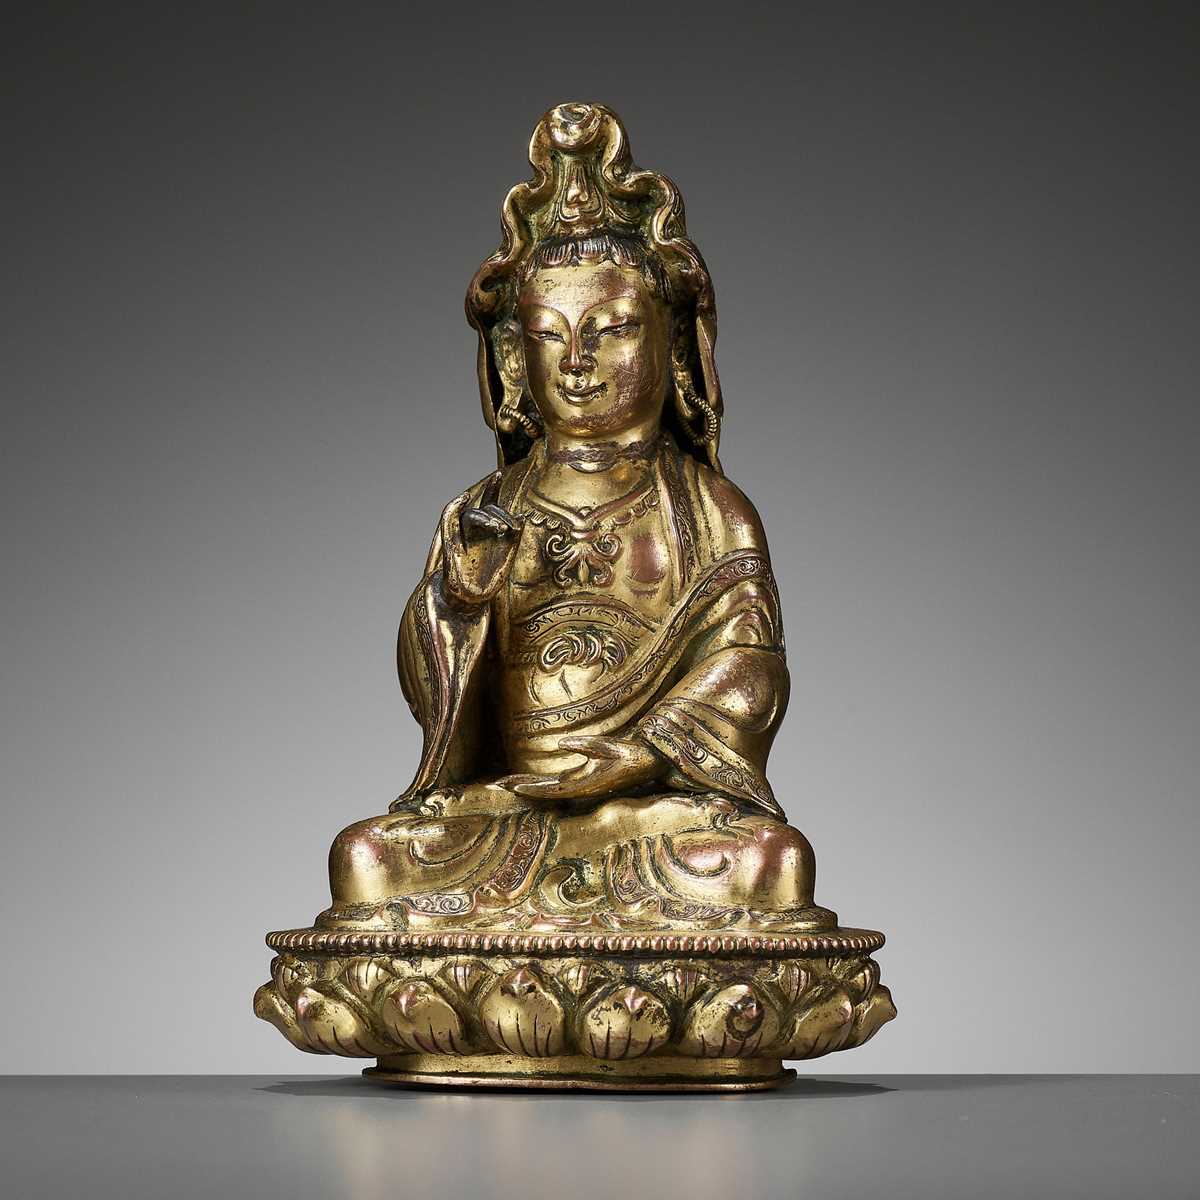 Lot 83 - A GILT COPPER ALLOY FIGURE OF GUANYIN, 18TH CENTURY